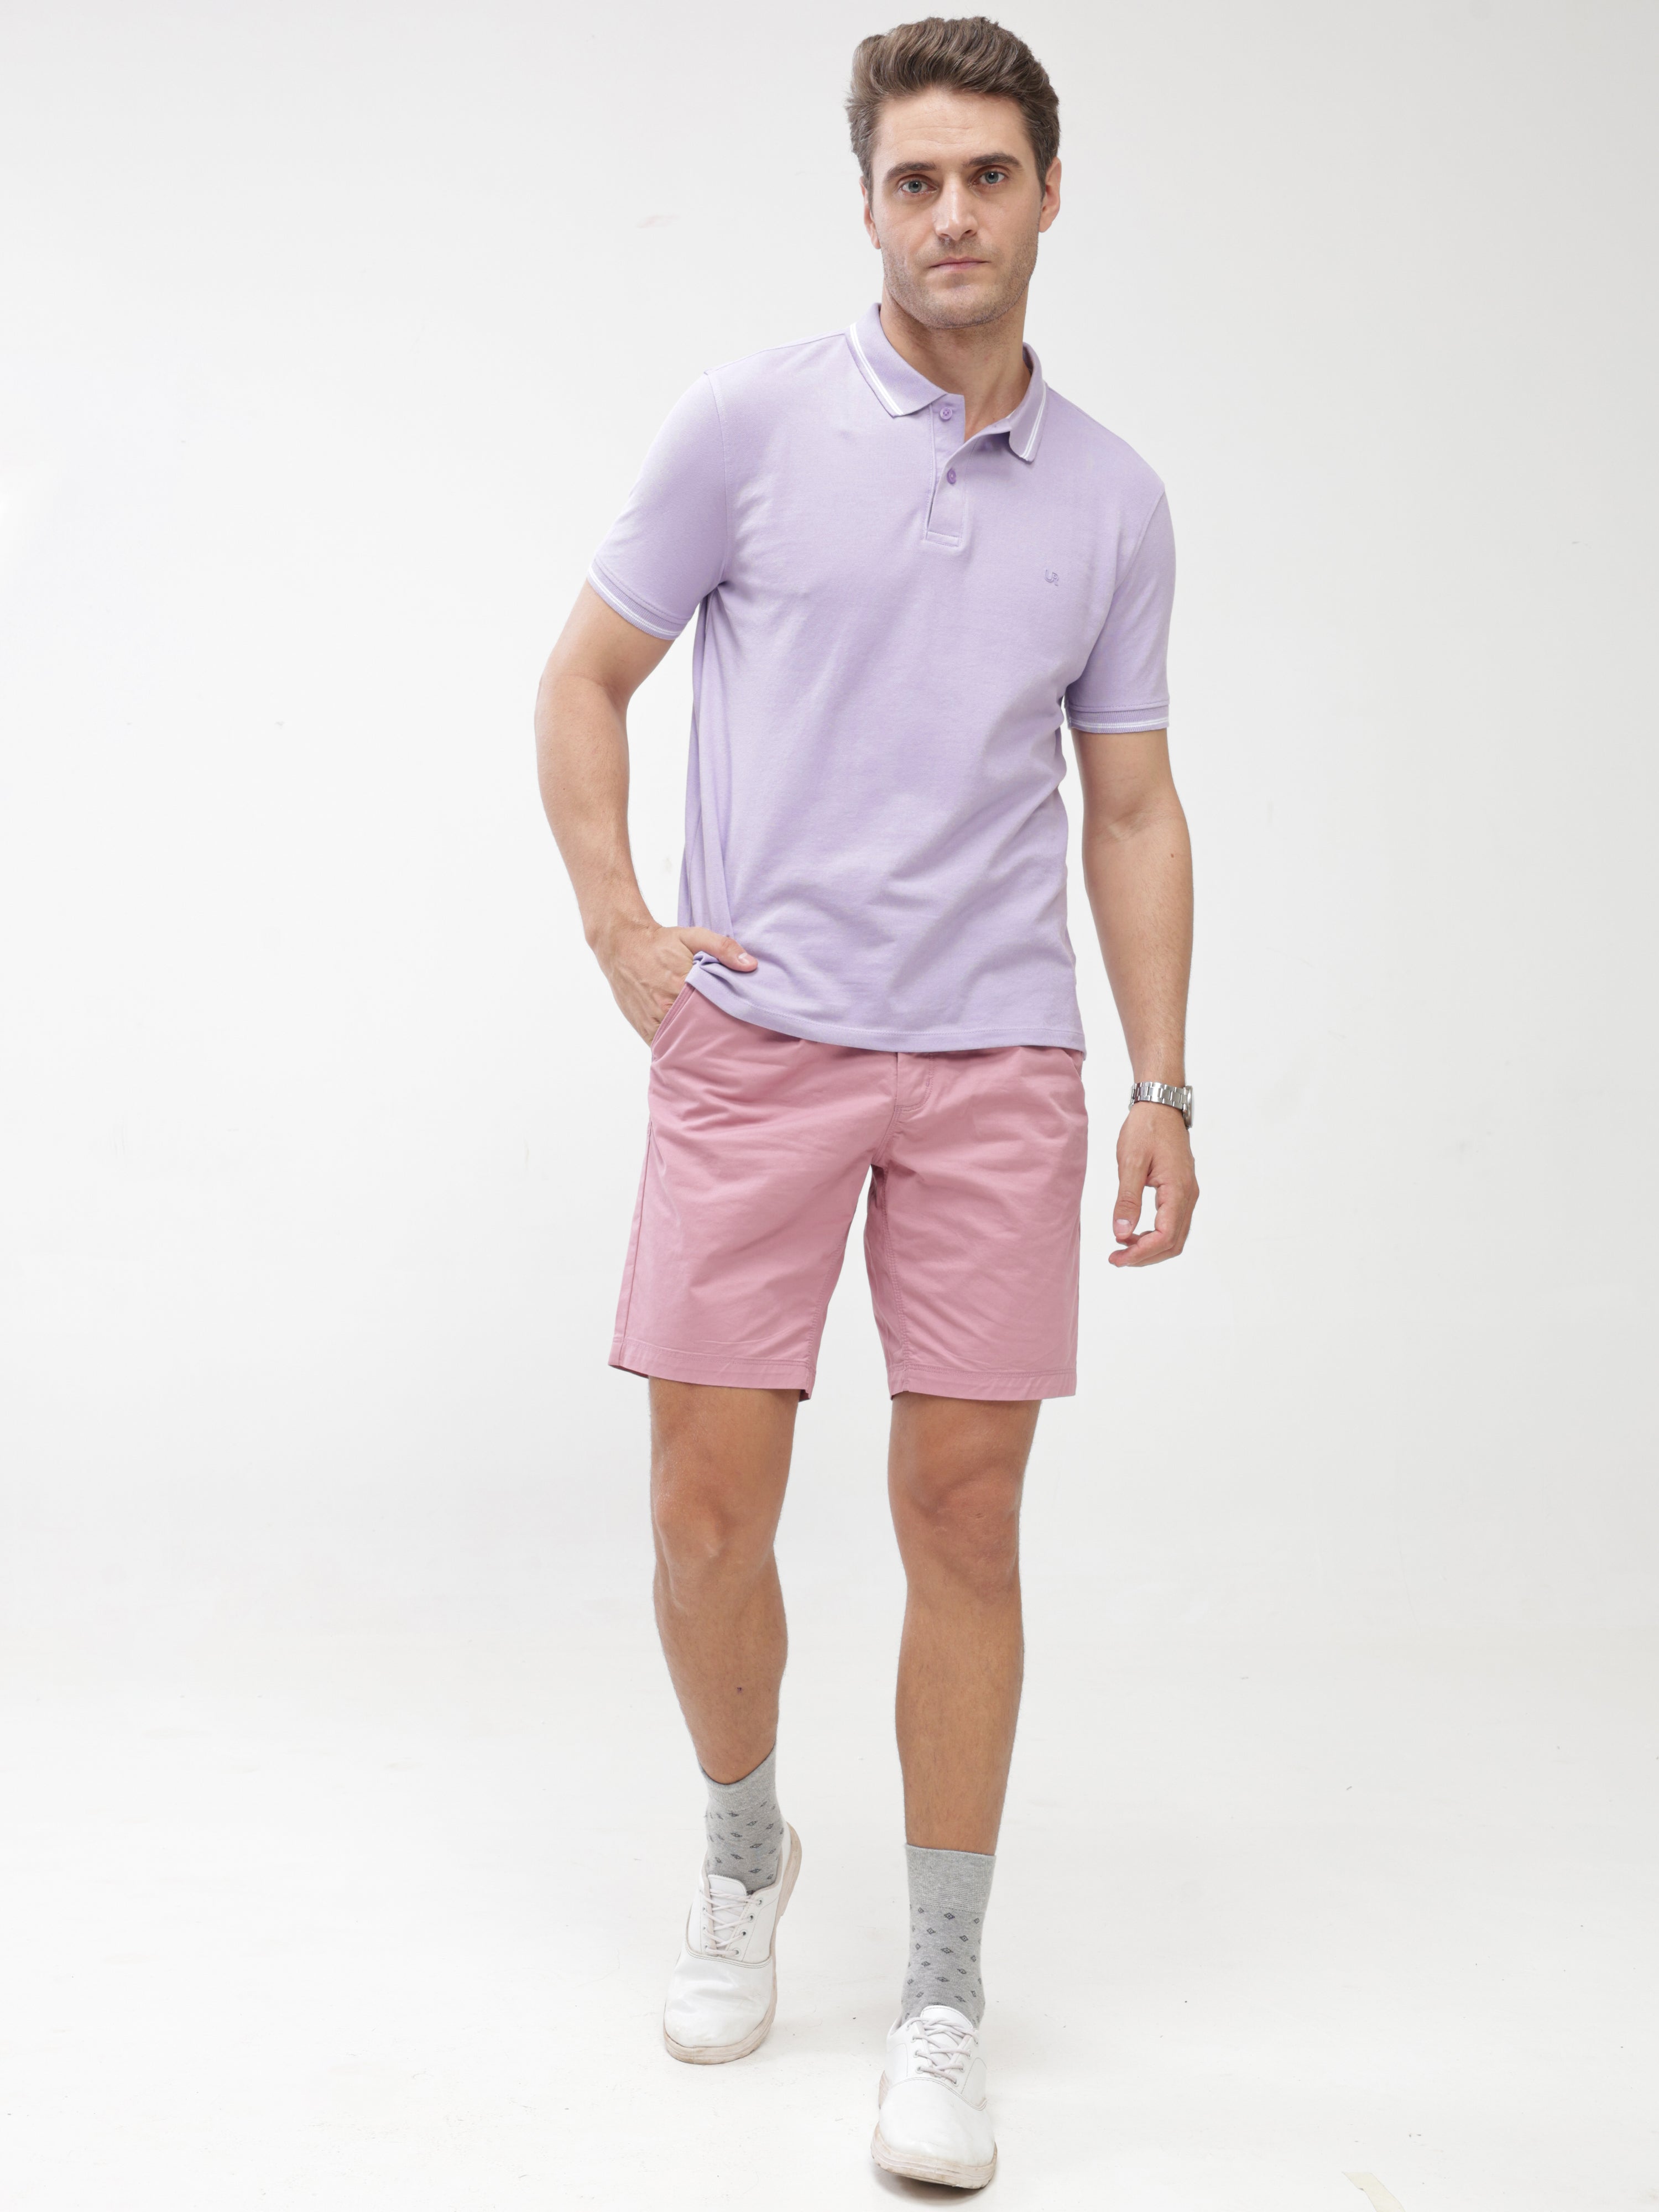 Man wearing Plume stain-proof and odor-resistant Turms Polo T-shirt in lavender, paired with pink shorts and white sneakers